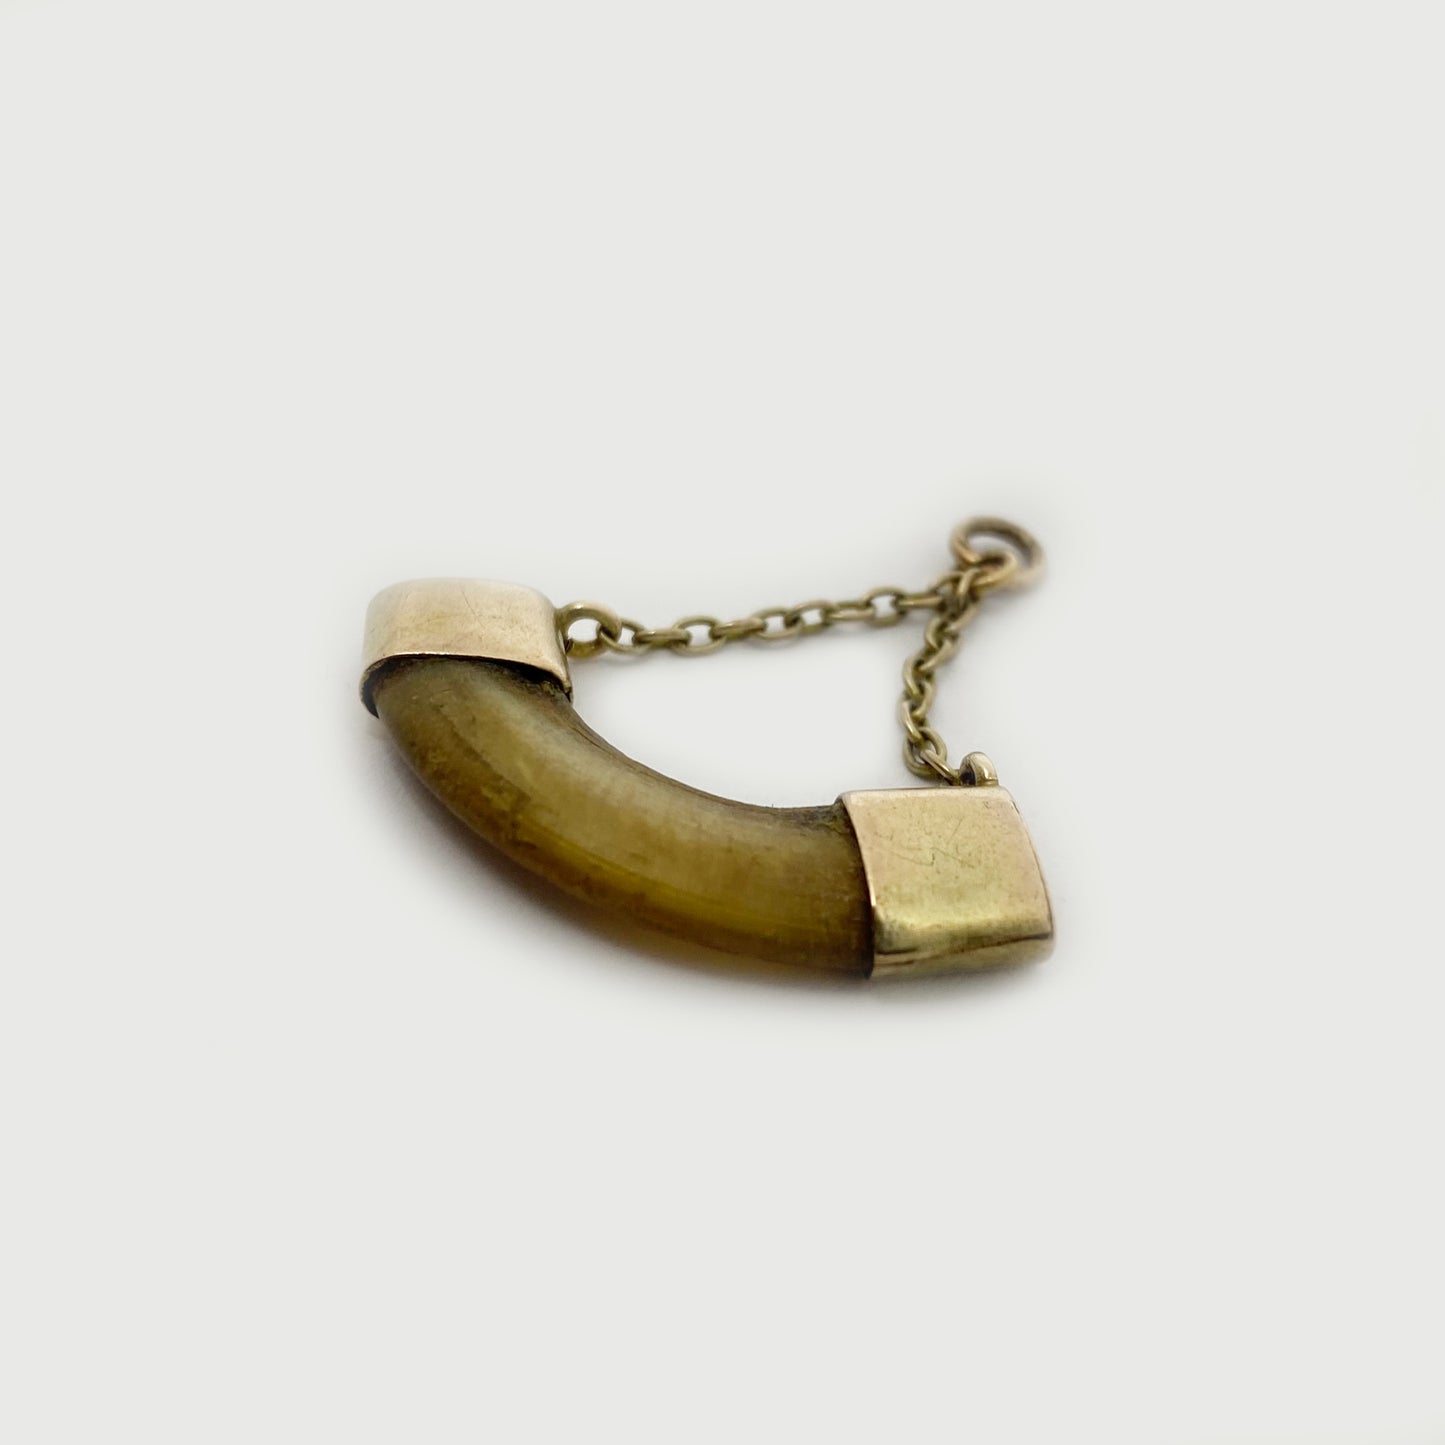 Antique 9K Gold Claw Pendant, 1800s Claw Jewelry, Victorian Amulet, Animal Talisman, Evil Eye, 9k Gold Tooth Claw Horn Tooth Shaped Charm